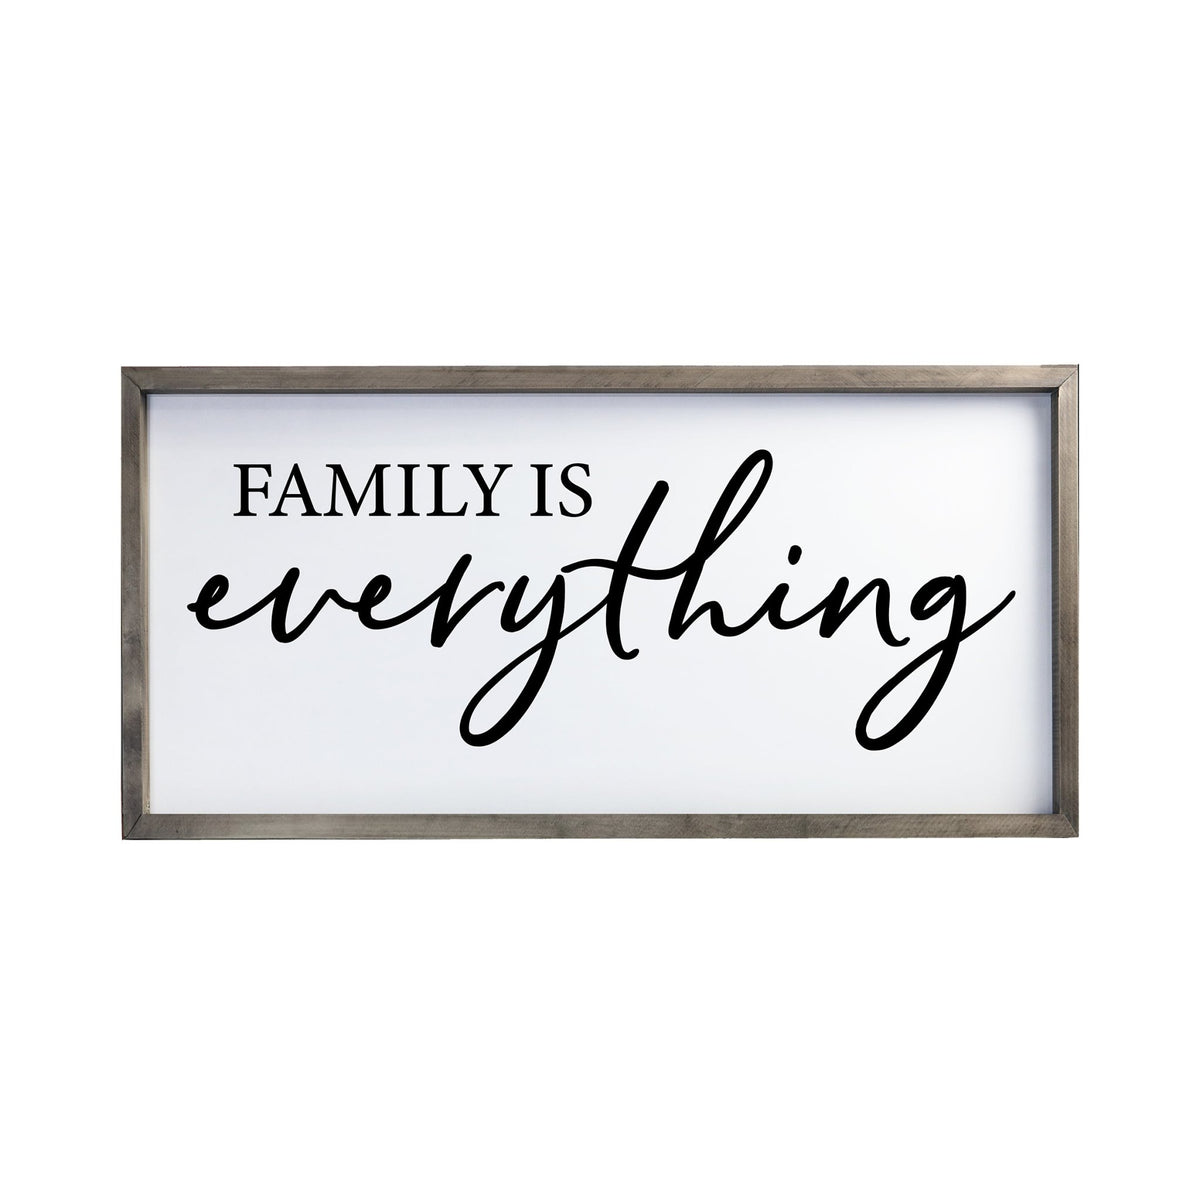 Large Family Wall Decor Quote Sign For Home 18 x 36 - Family Is Everything - LifeSong Milestones